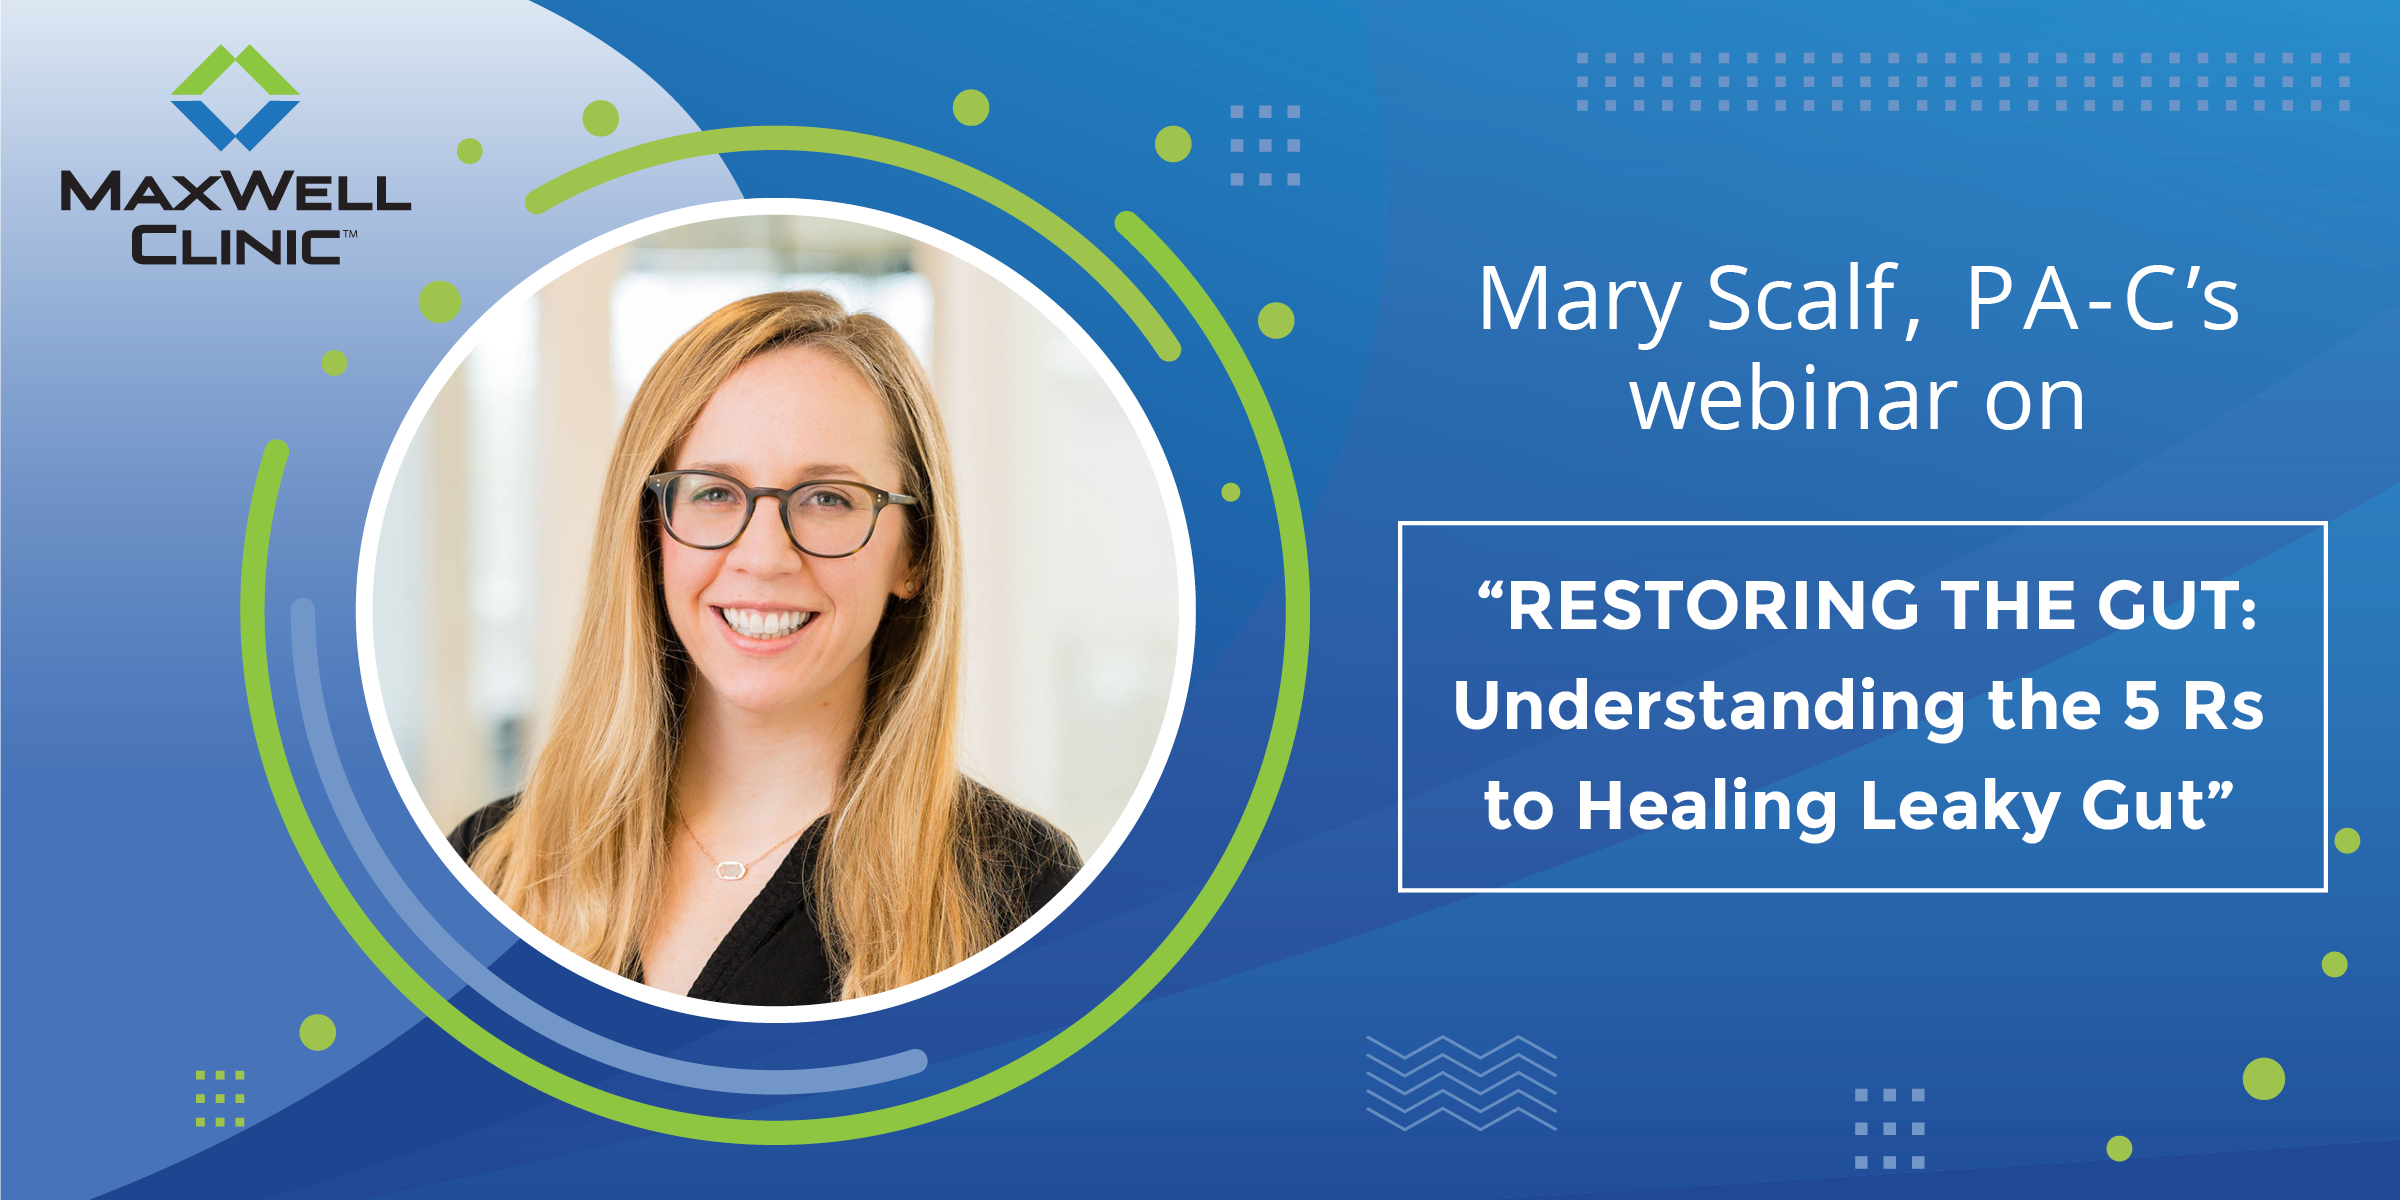 Restoring the Gut: Understanding the 5 Rs to Healing Leaky Gut with Mary Scalf, PA-C